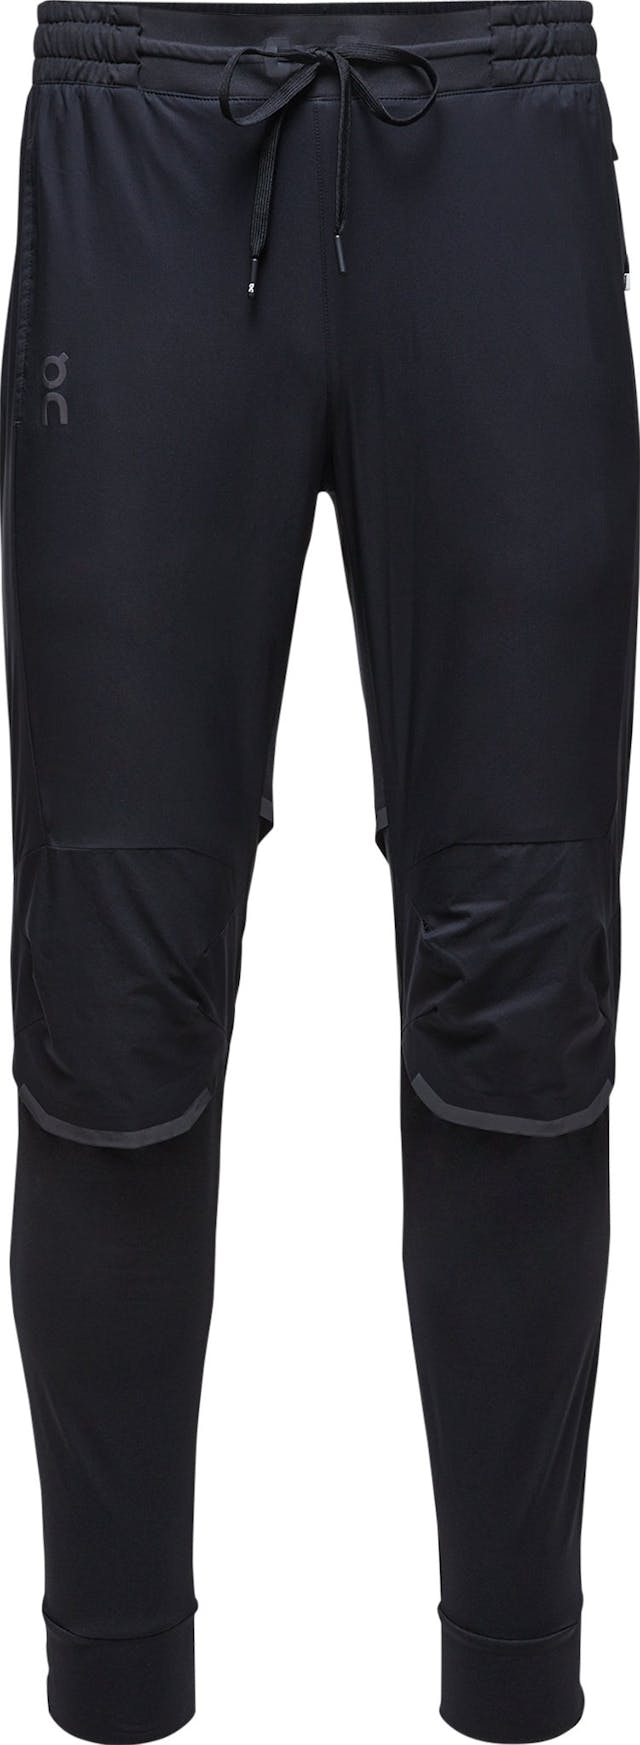 Product image for Running Pants - Men's